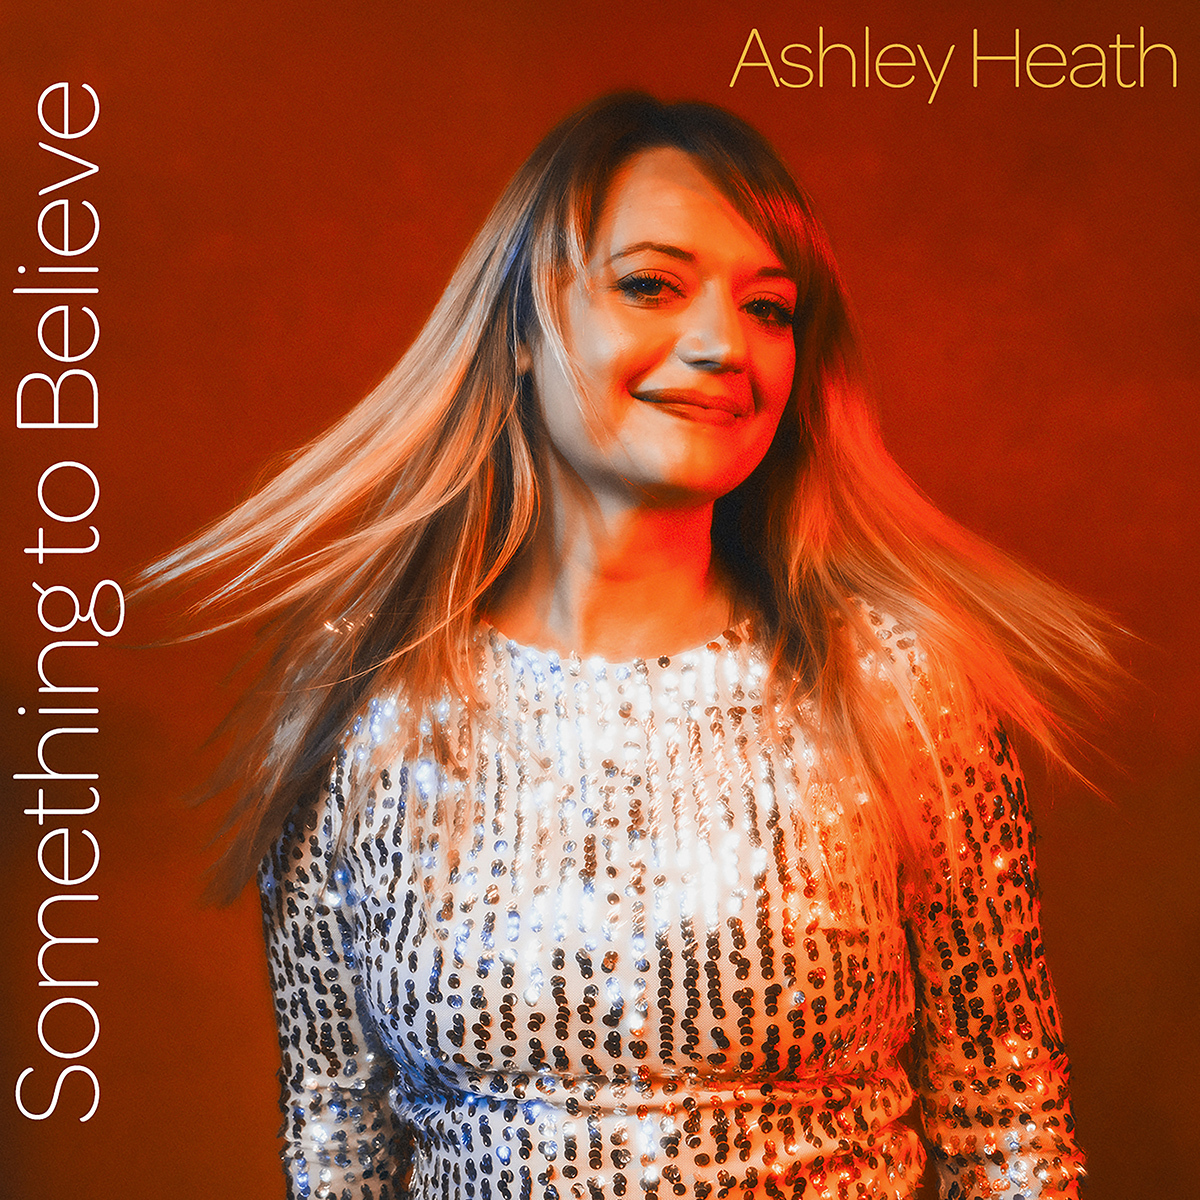 Ashley Heath's Something To Believe makes a bold musical statement